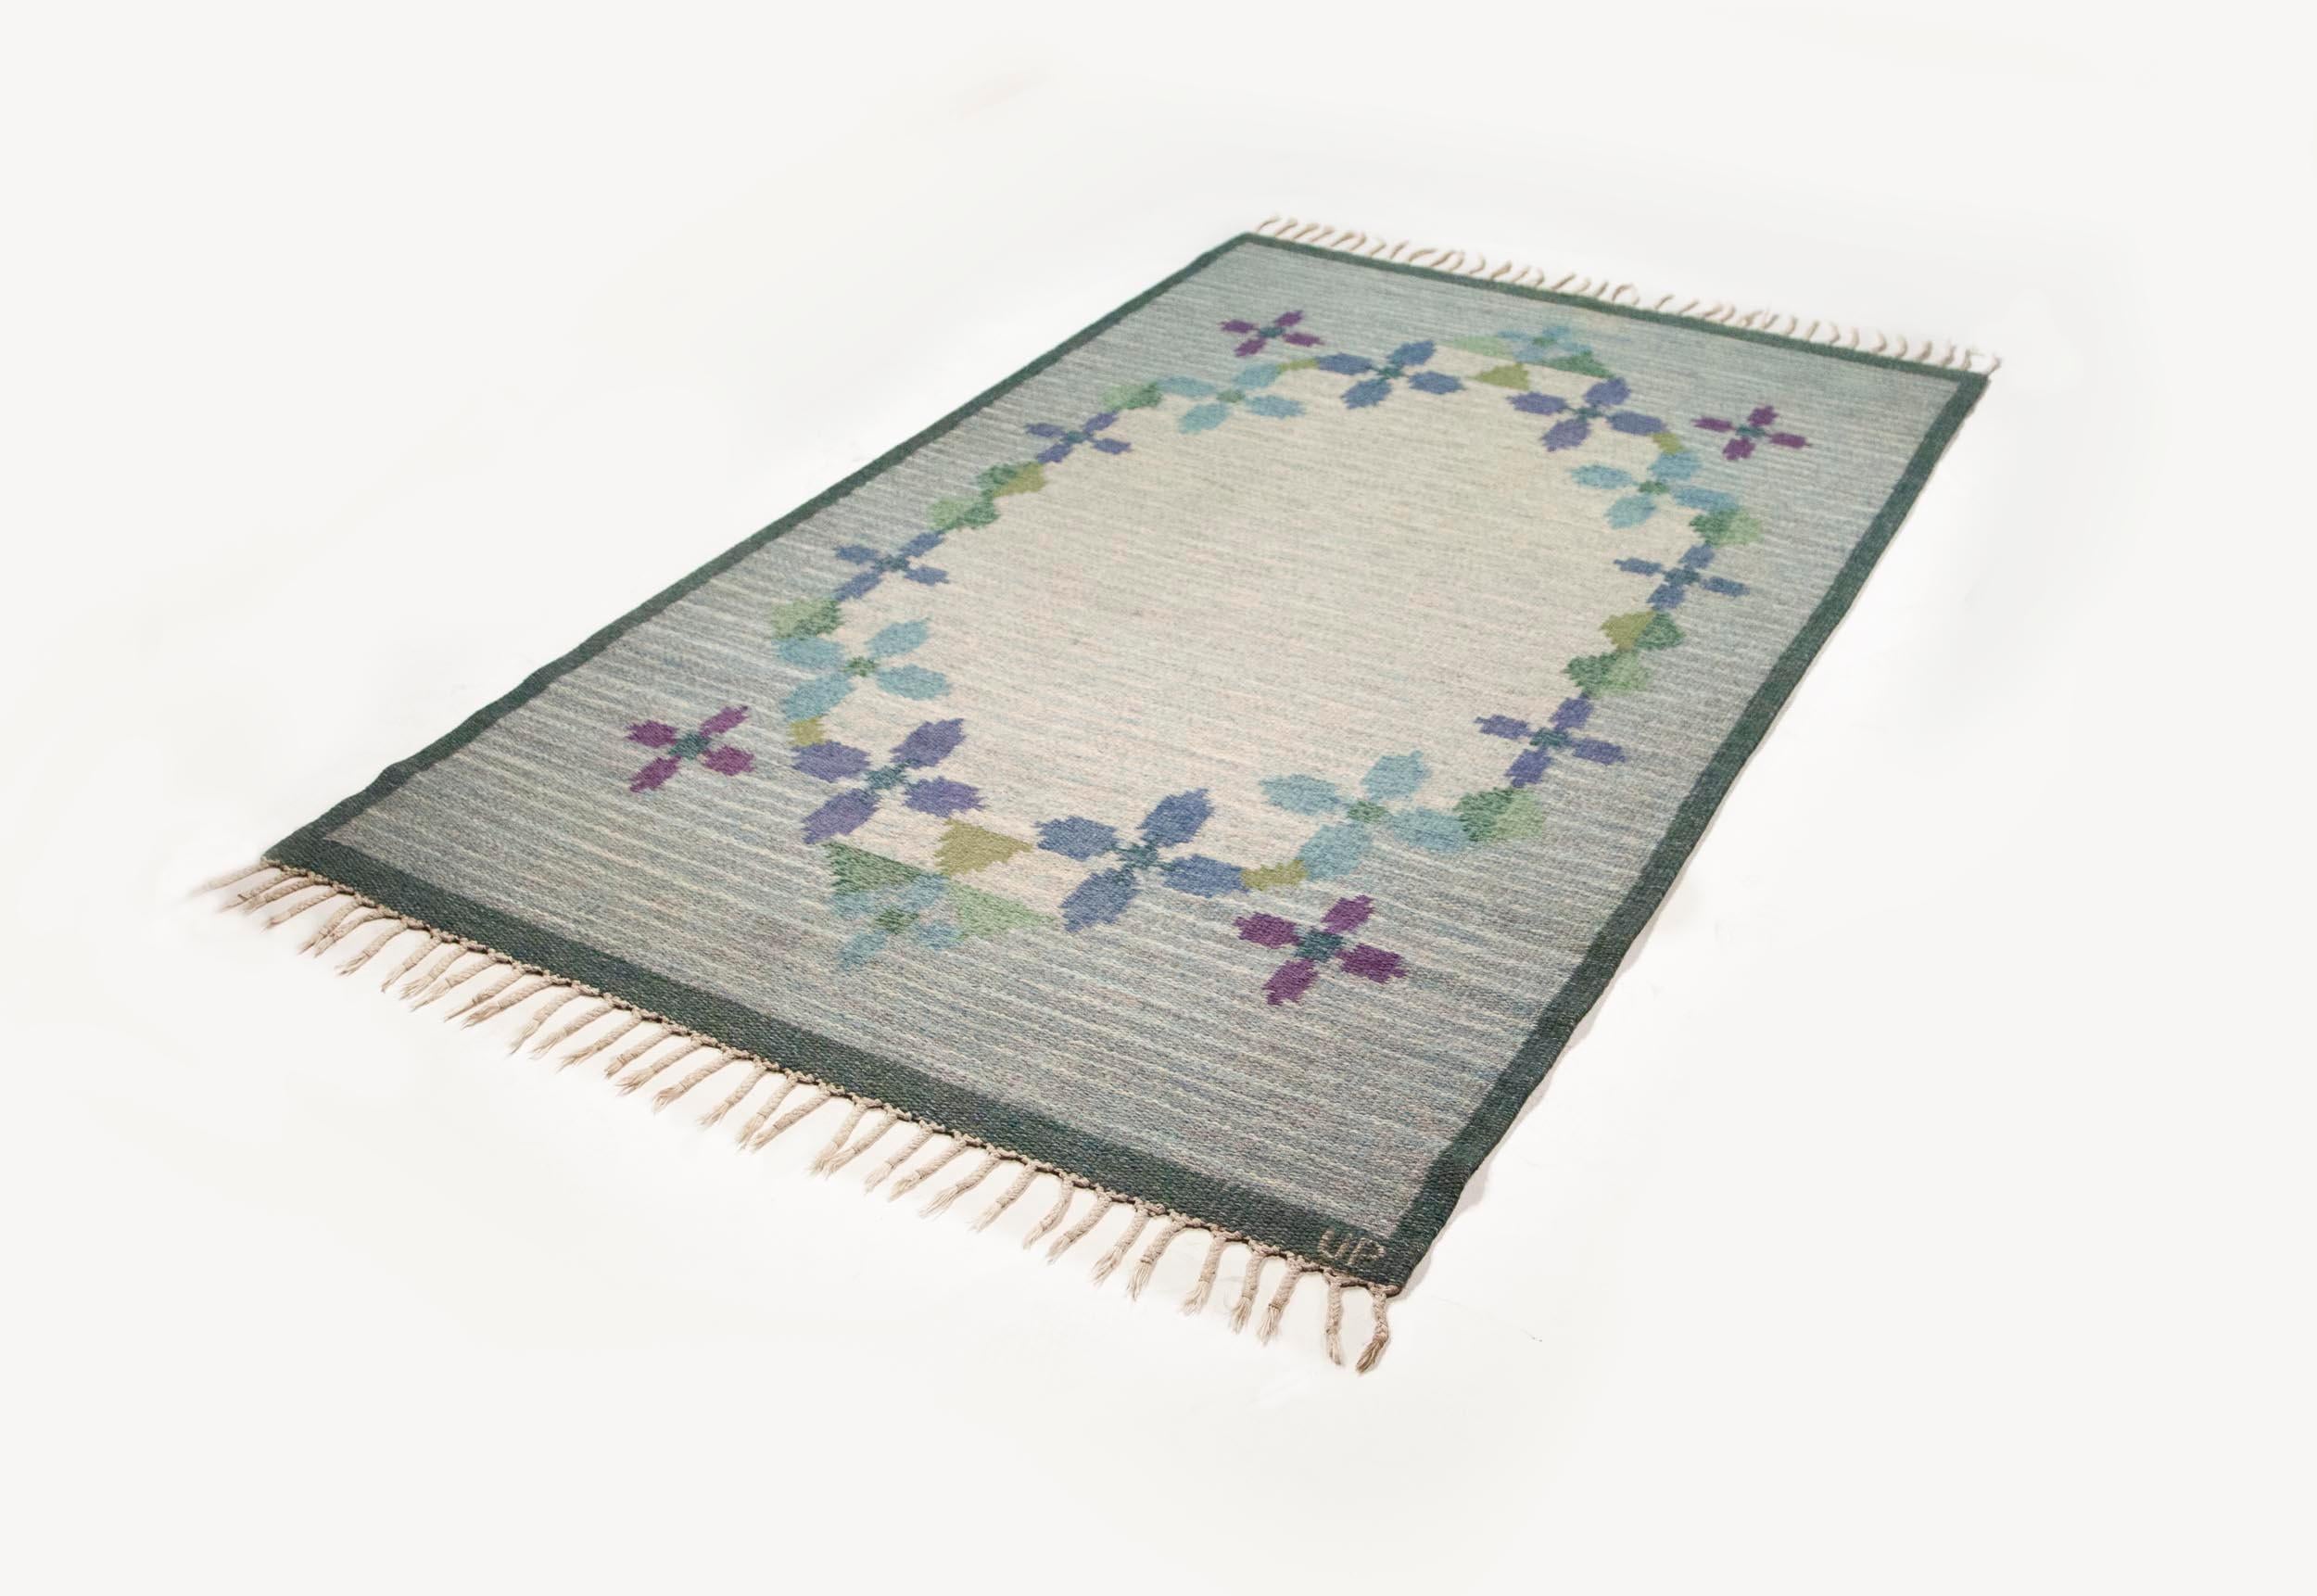 Ulla Parkdah Swedish flat-weave rug, signed UP, Sweden, 1960s

This particular Swedish carpet is a wonderful representation of midcentury Scandinavian rug design, especially in its treatment of geometric floral details. In the case of this carpet,